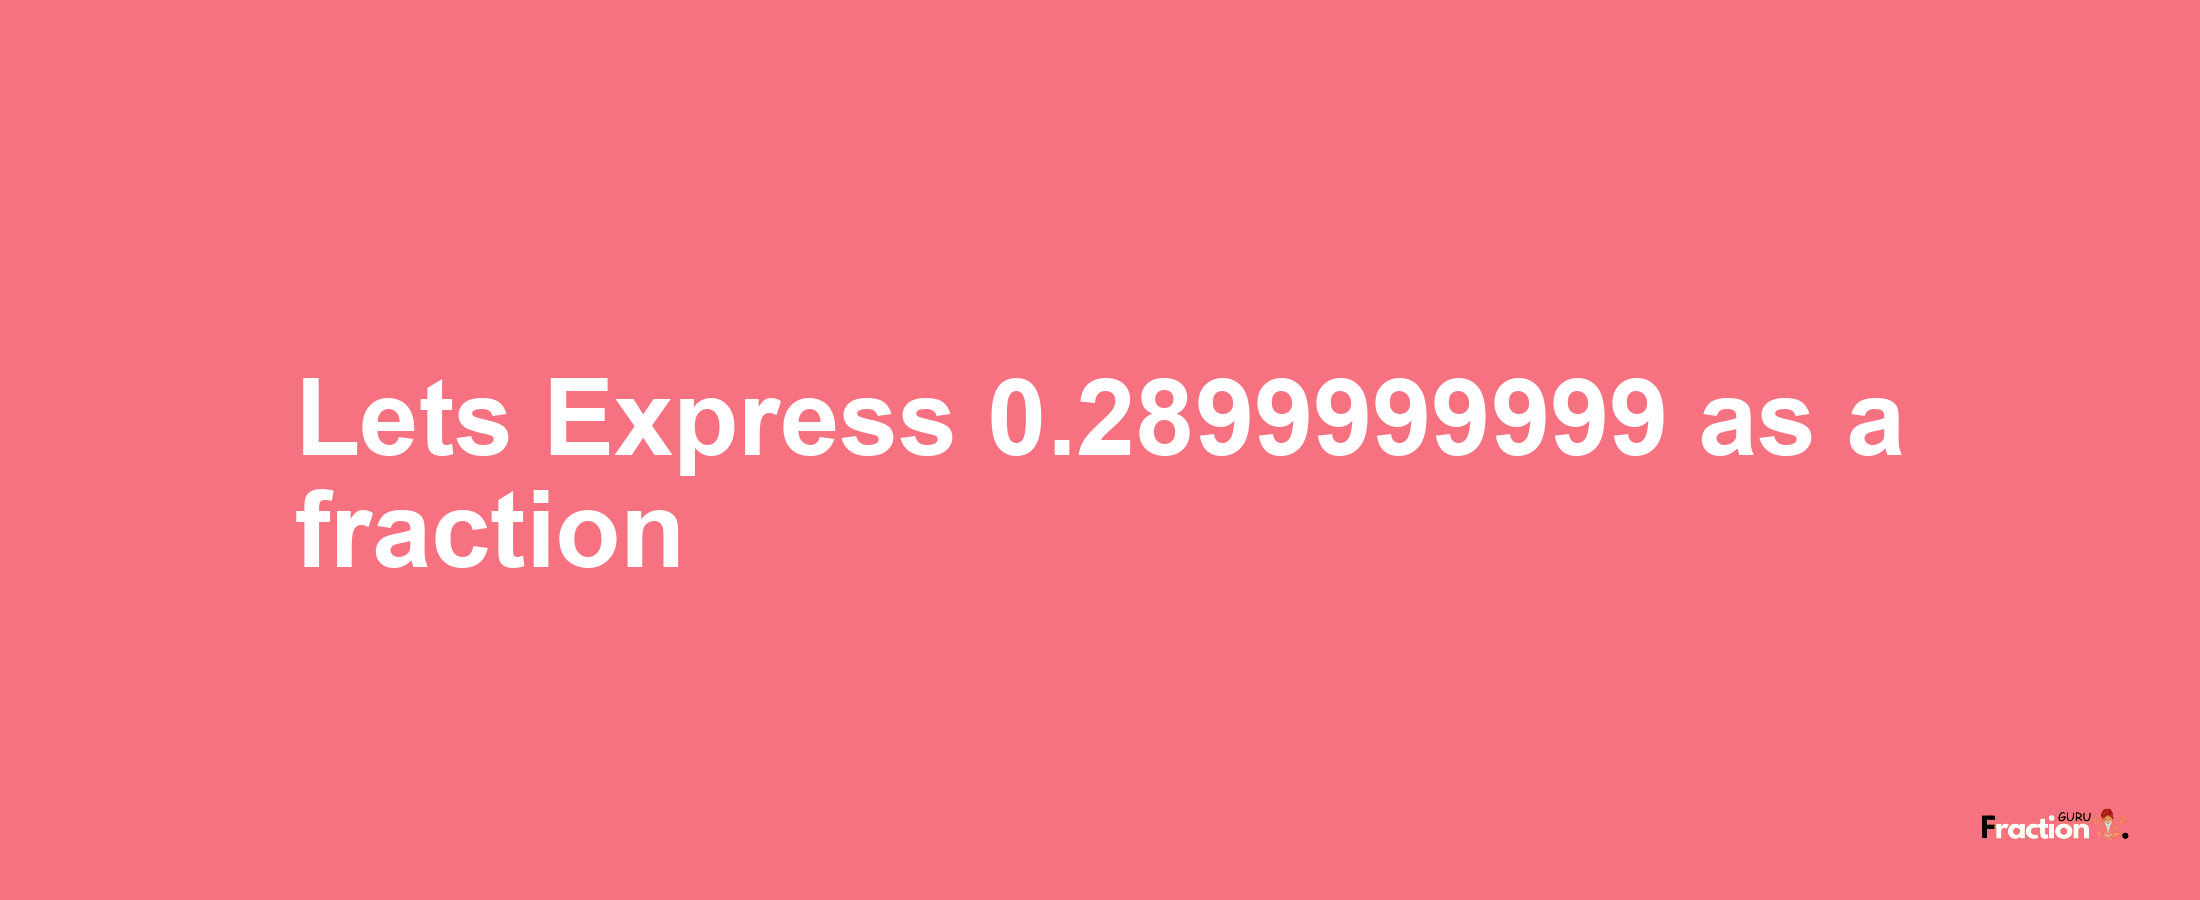 Lets Express 0.2899999999 as afraction